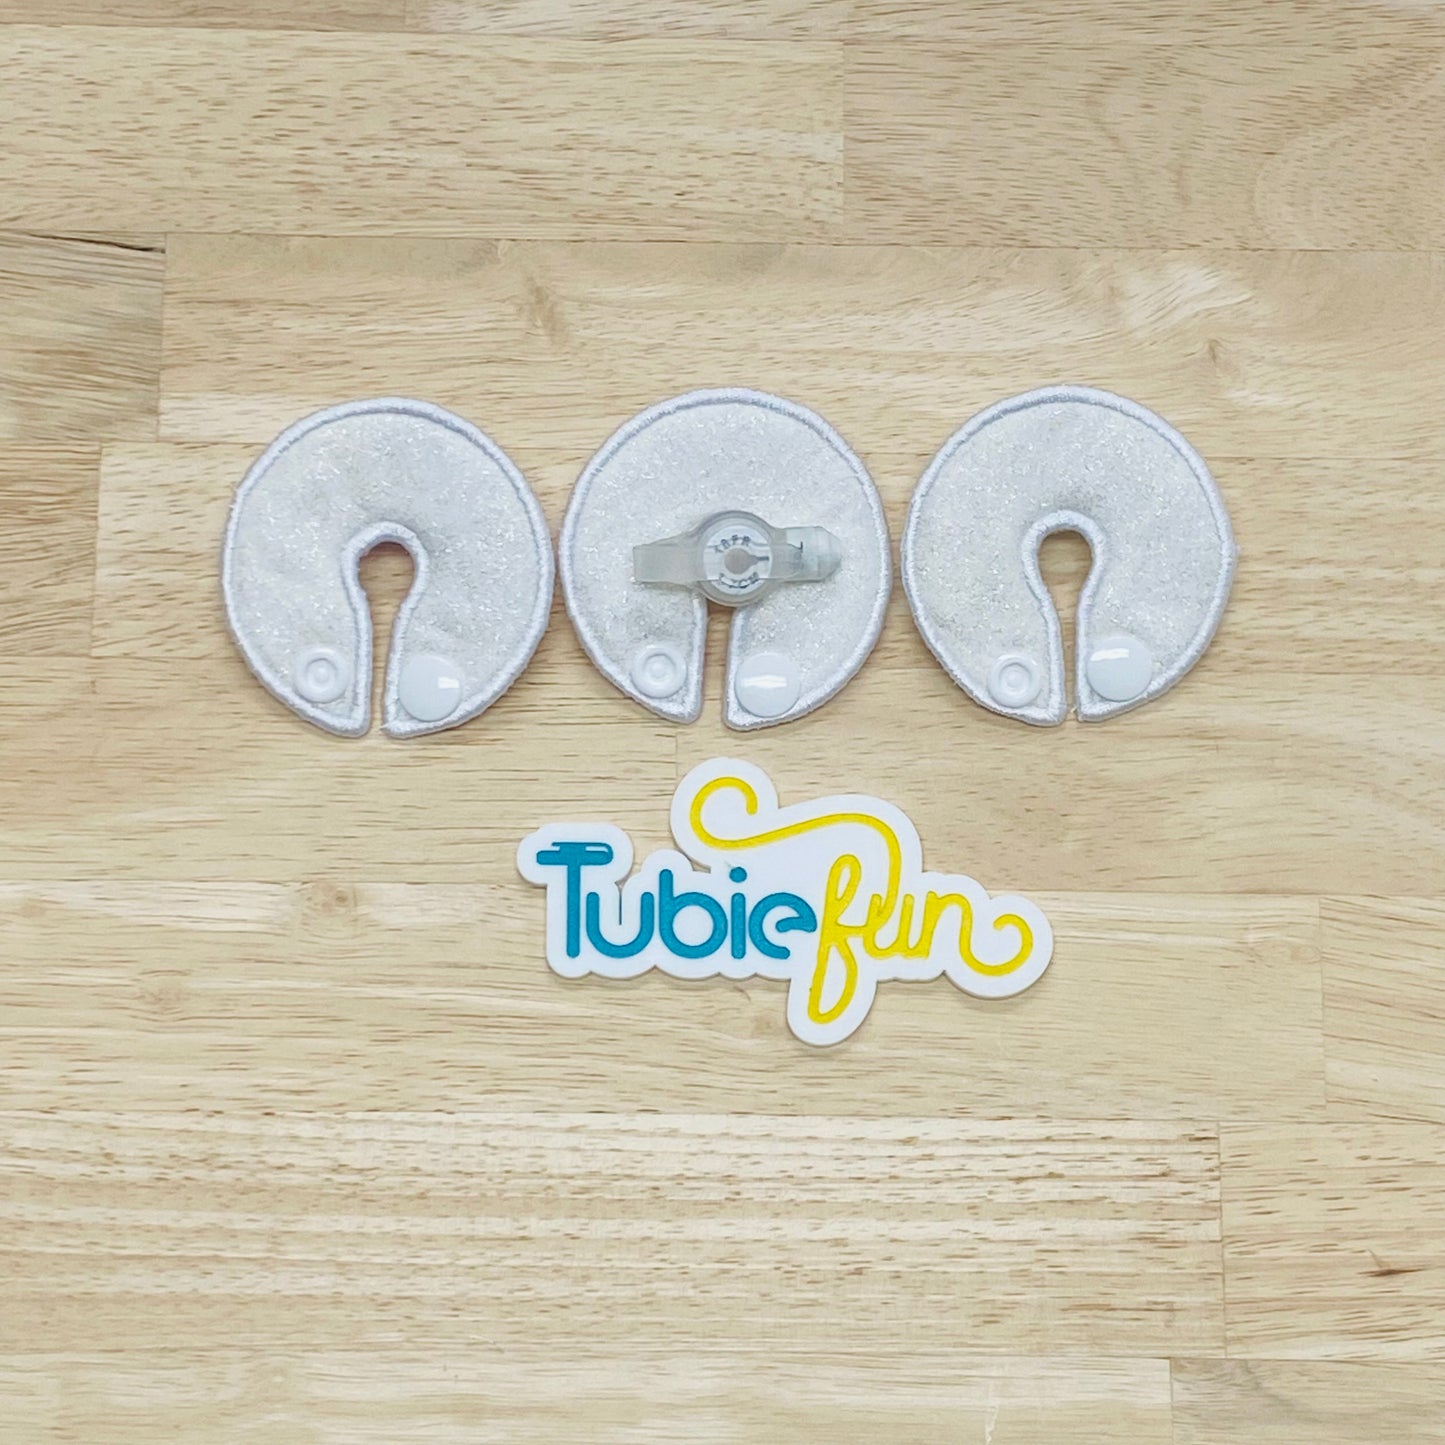 G-Tube Button Pad Cover - White with Glitter